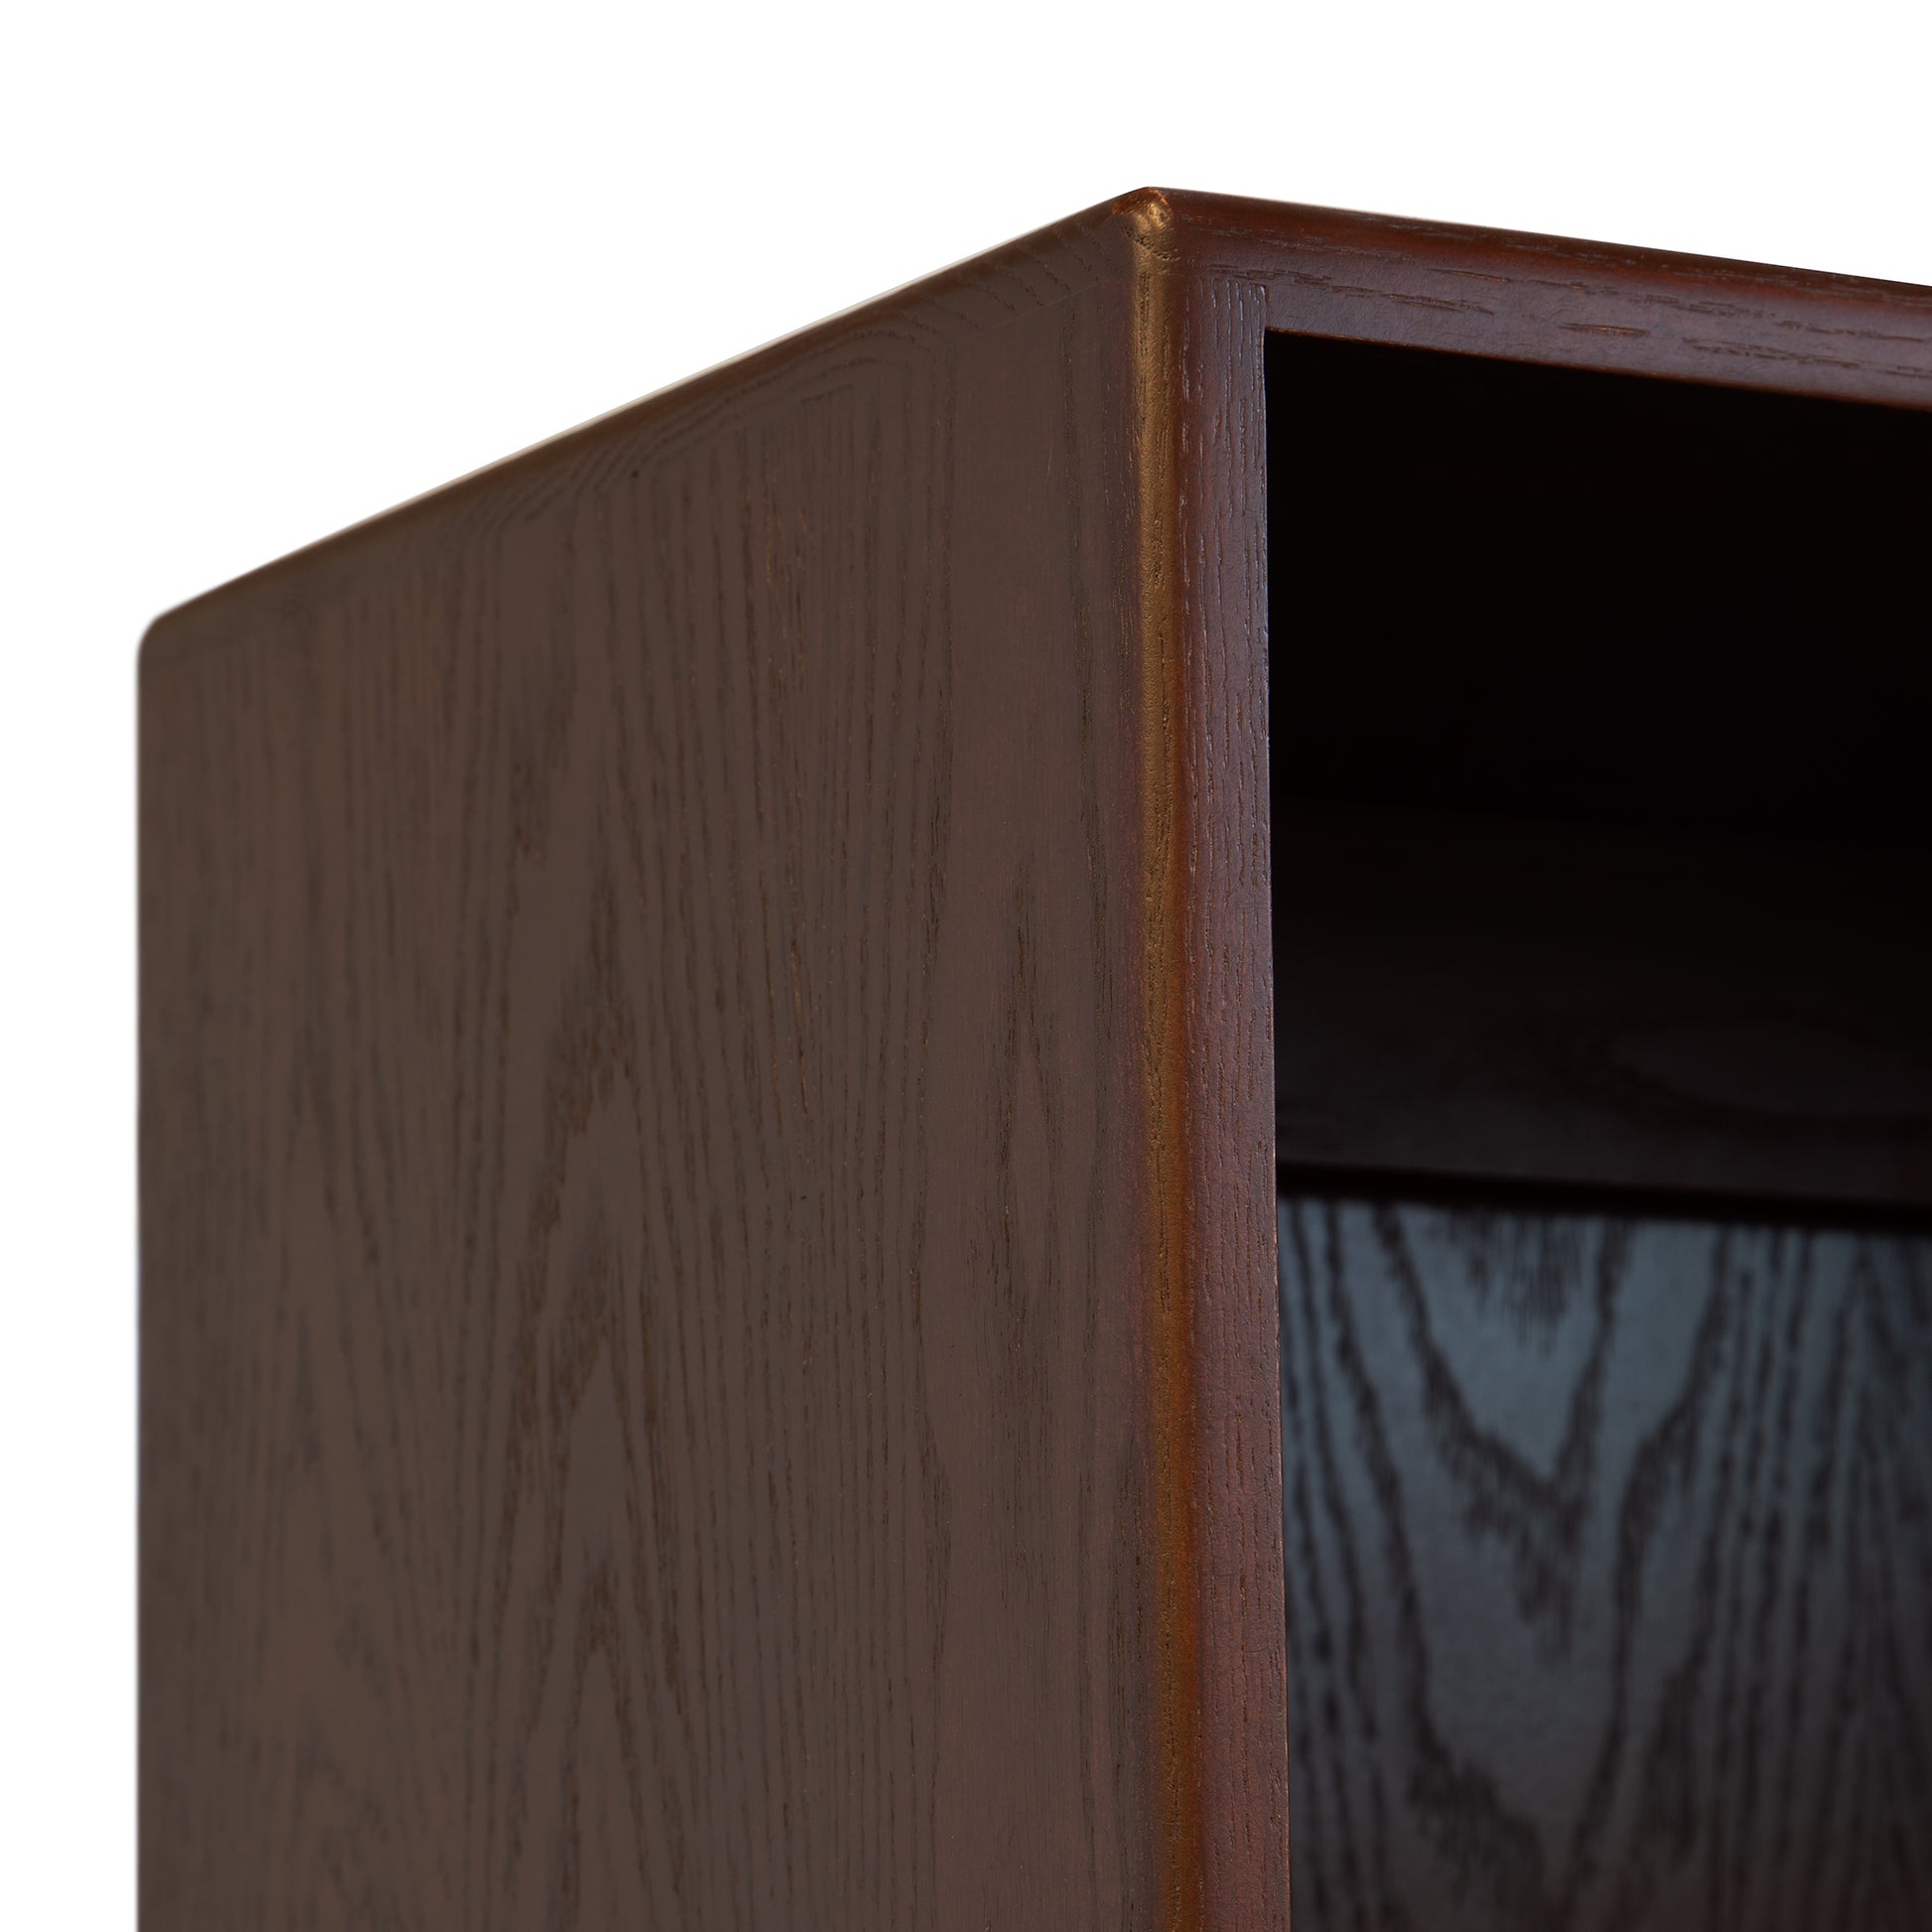 A Lyndon Furniture Custom Contemporary Wide Bookcase - 66" High - Clearance with a wooden shelf.